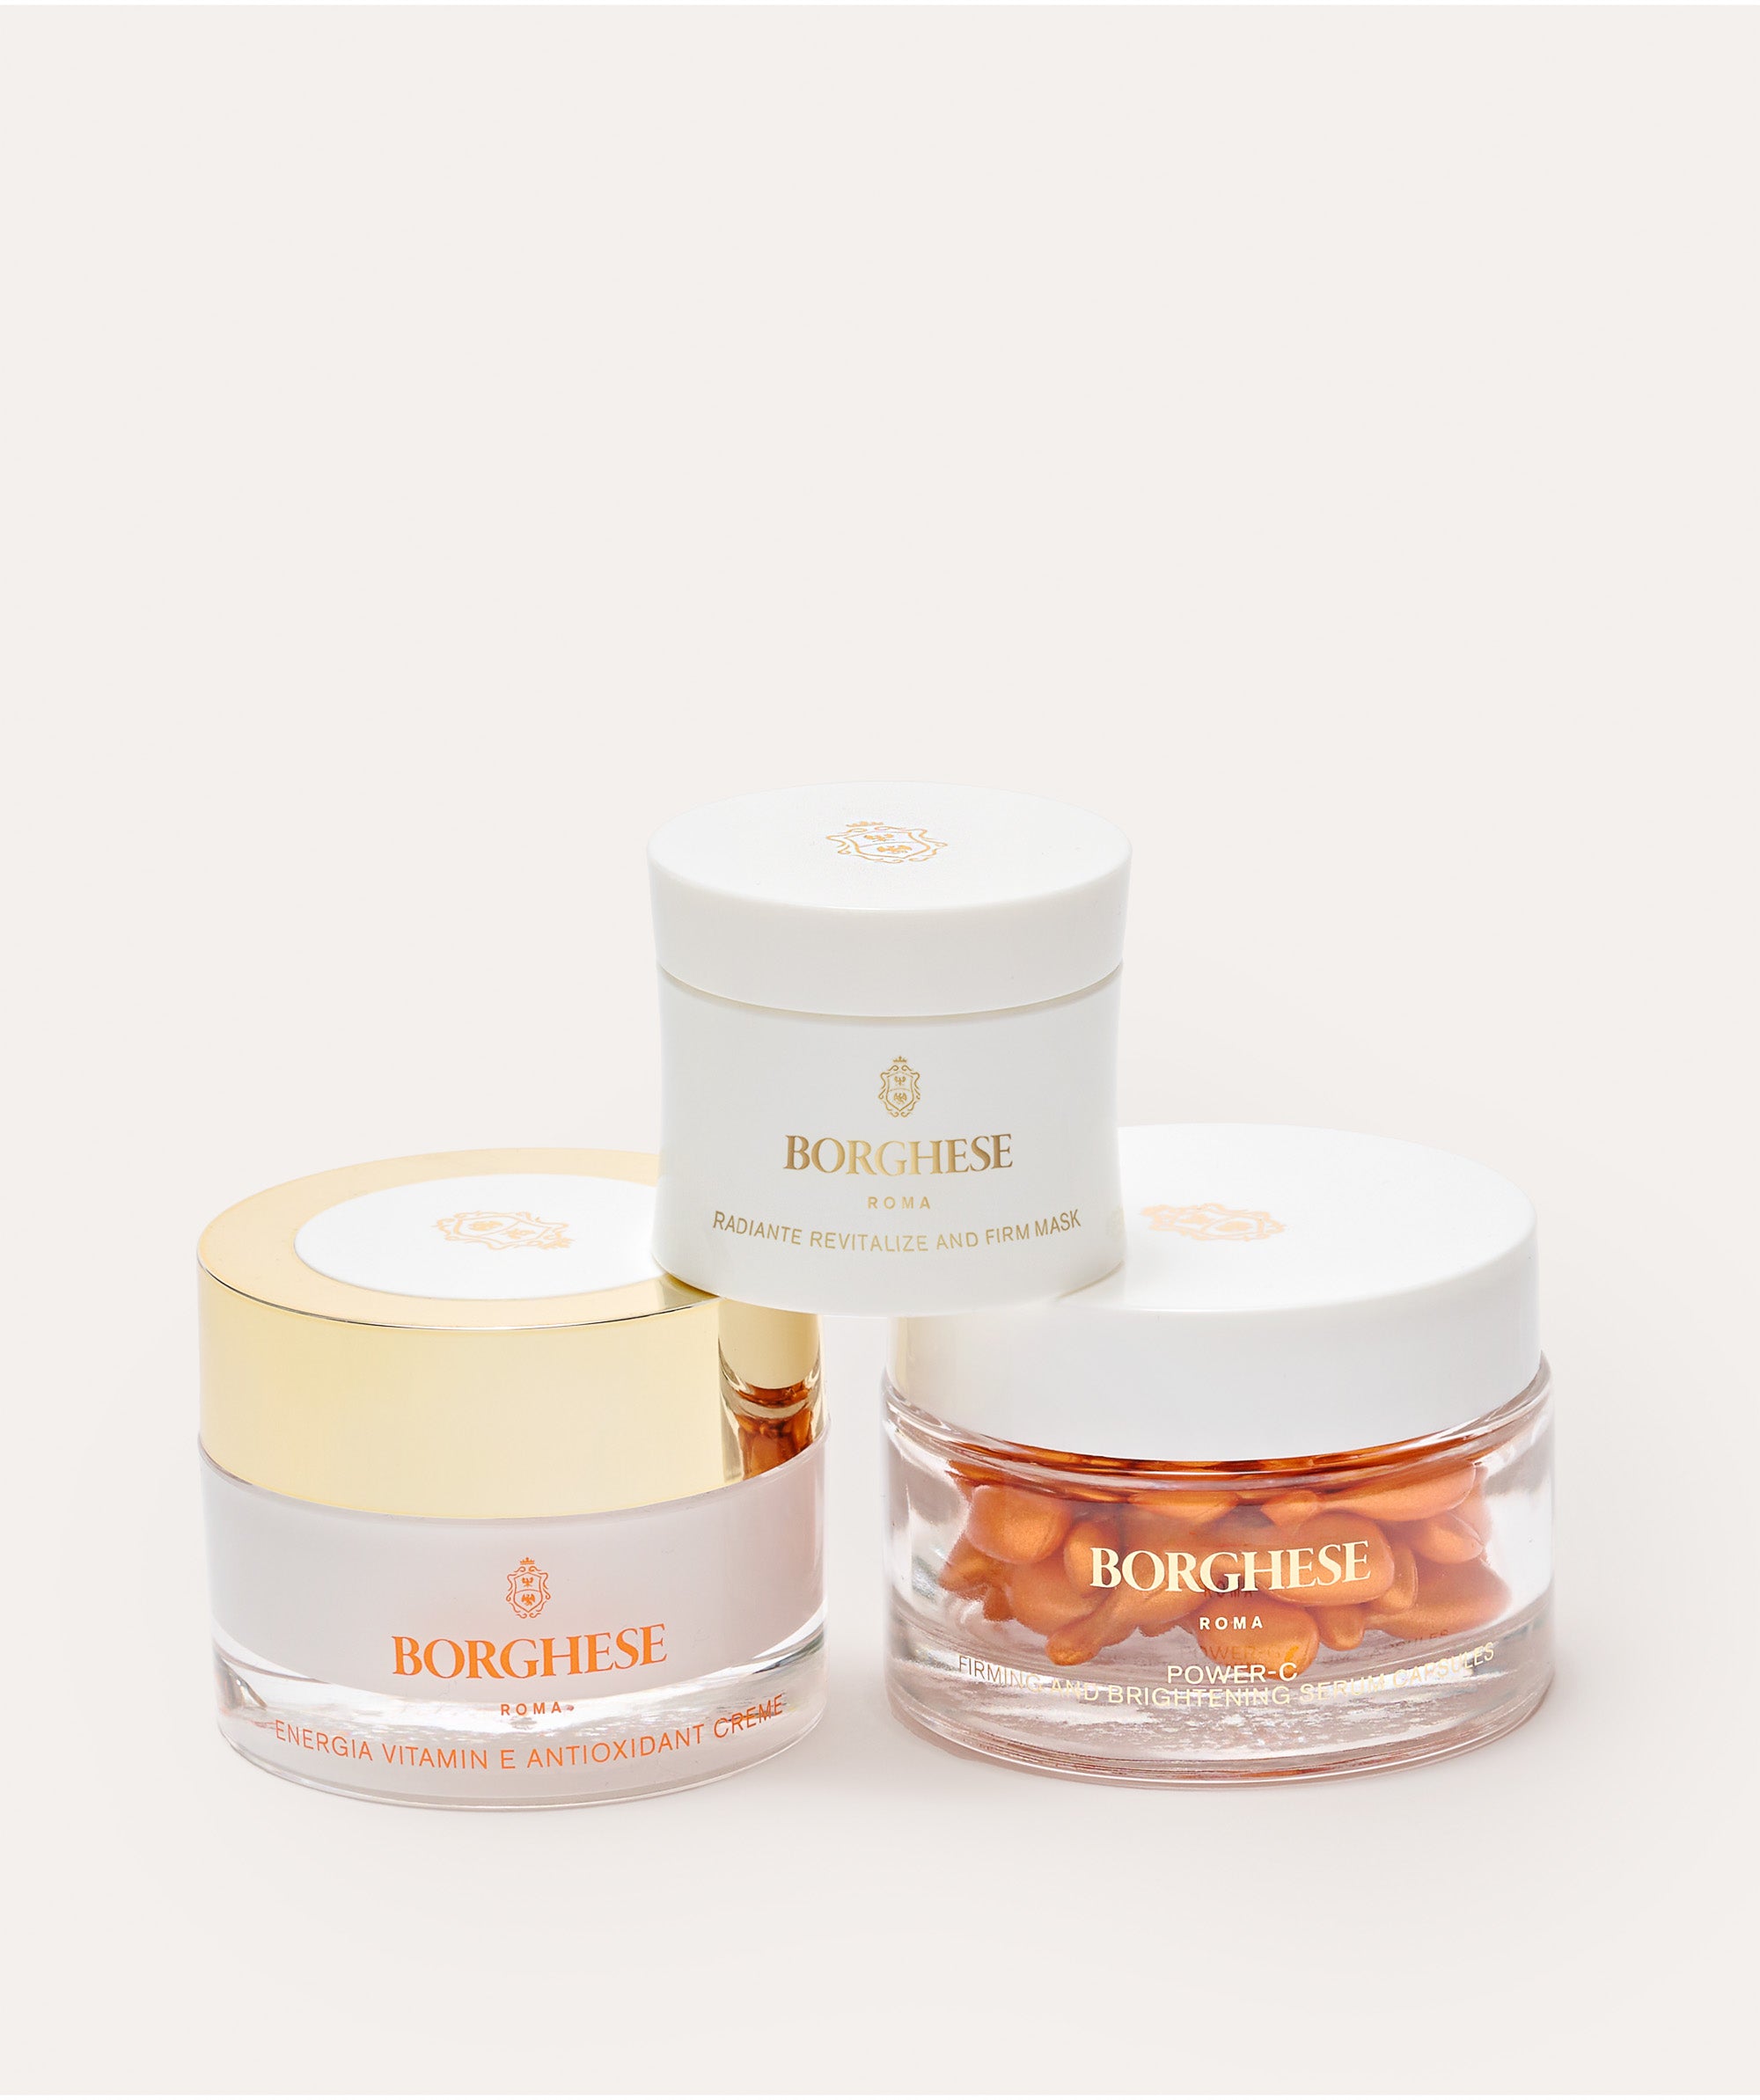 The Borghese Roma 3-Piece Best in Brightening Gift Set contents